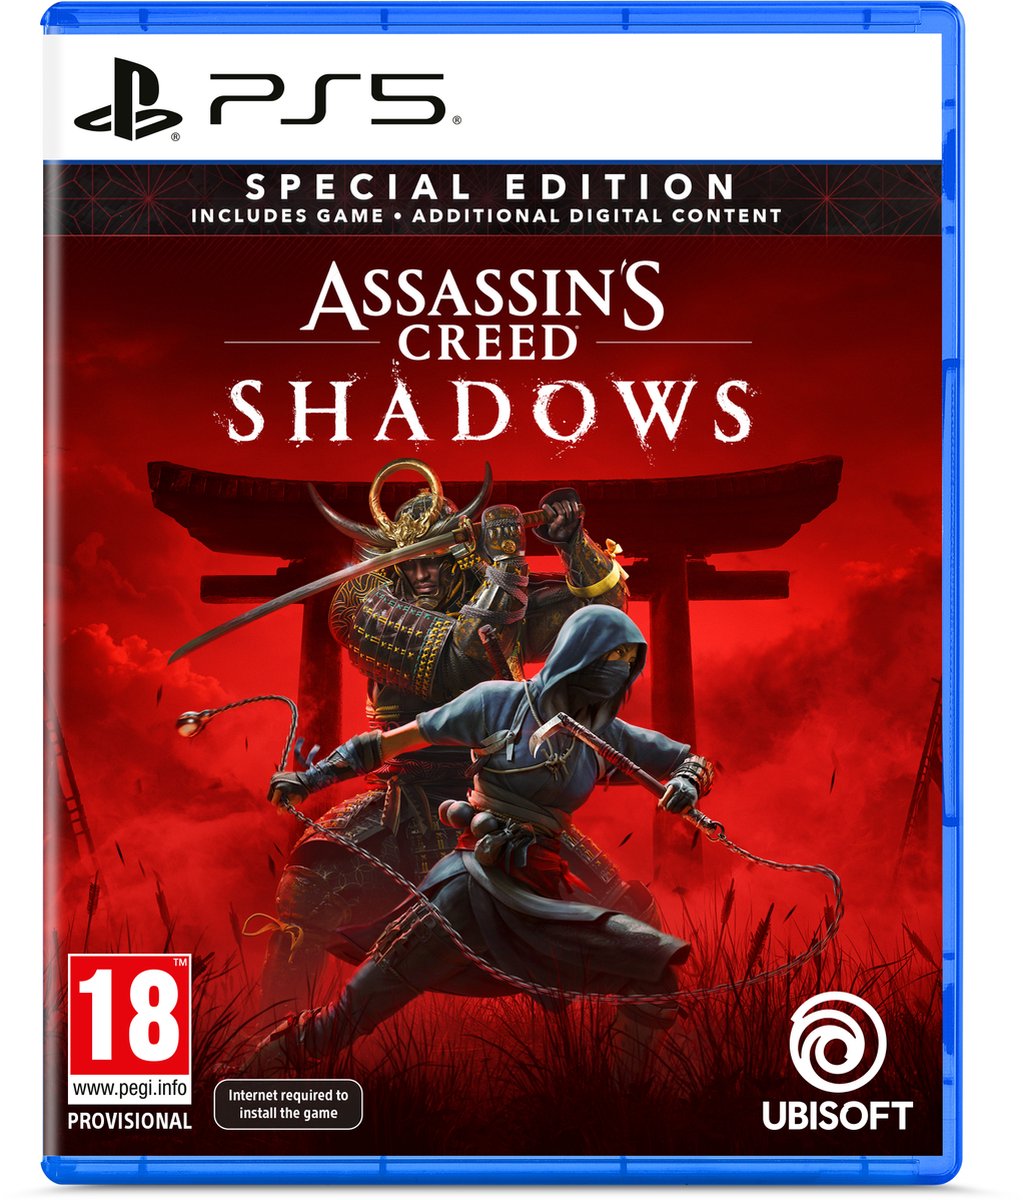 Assassin's Creed: Shadows - Special Edition (PS5), Ubisoft